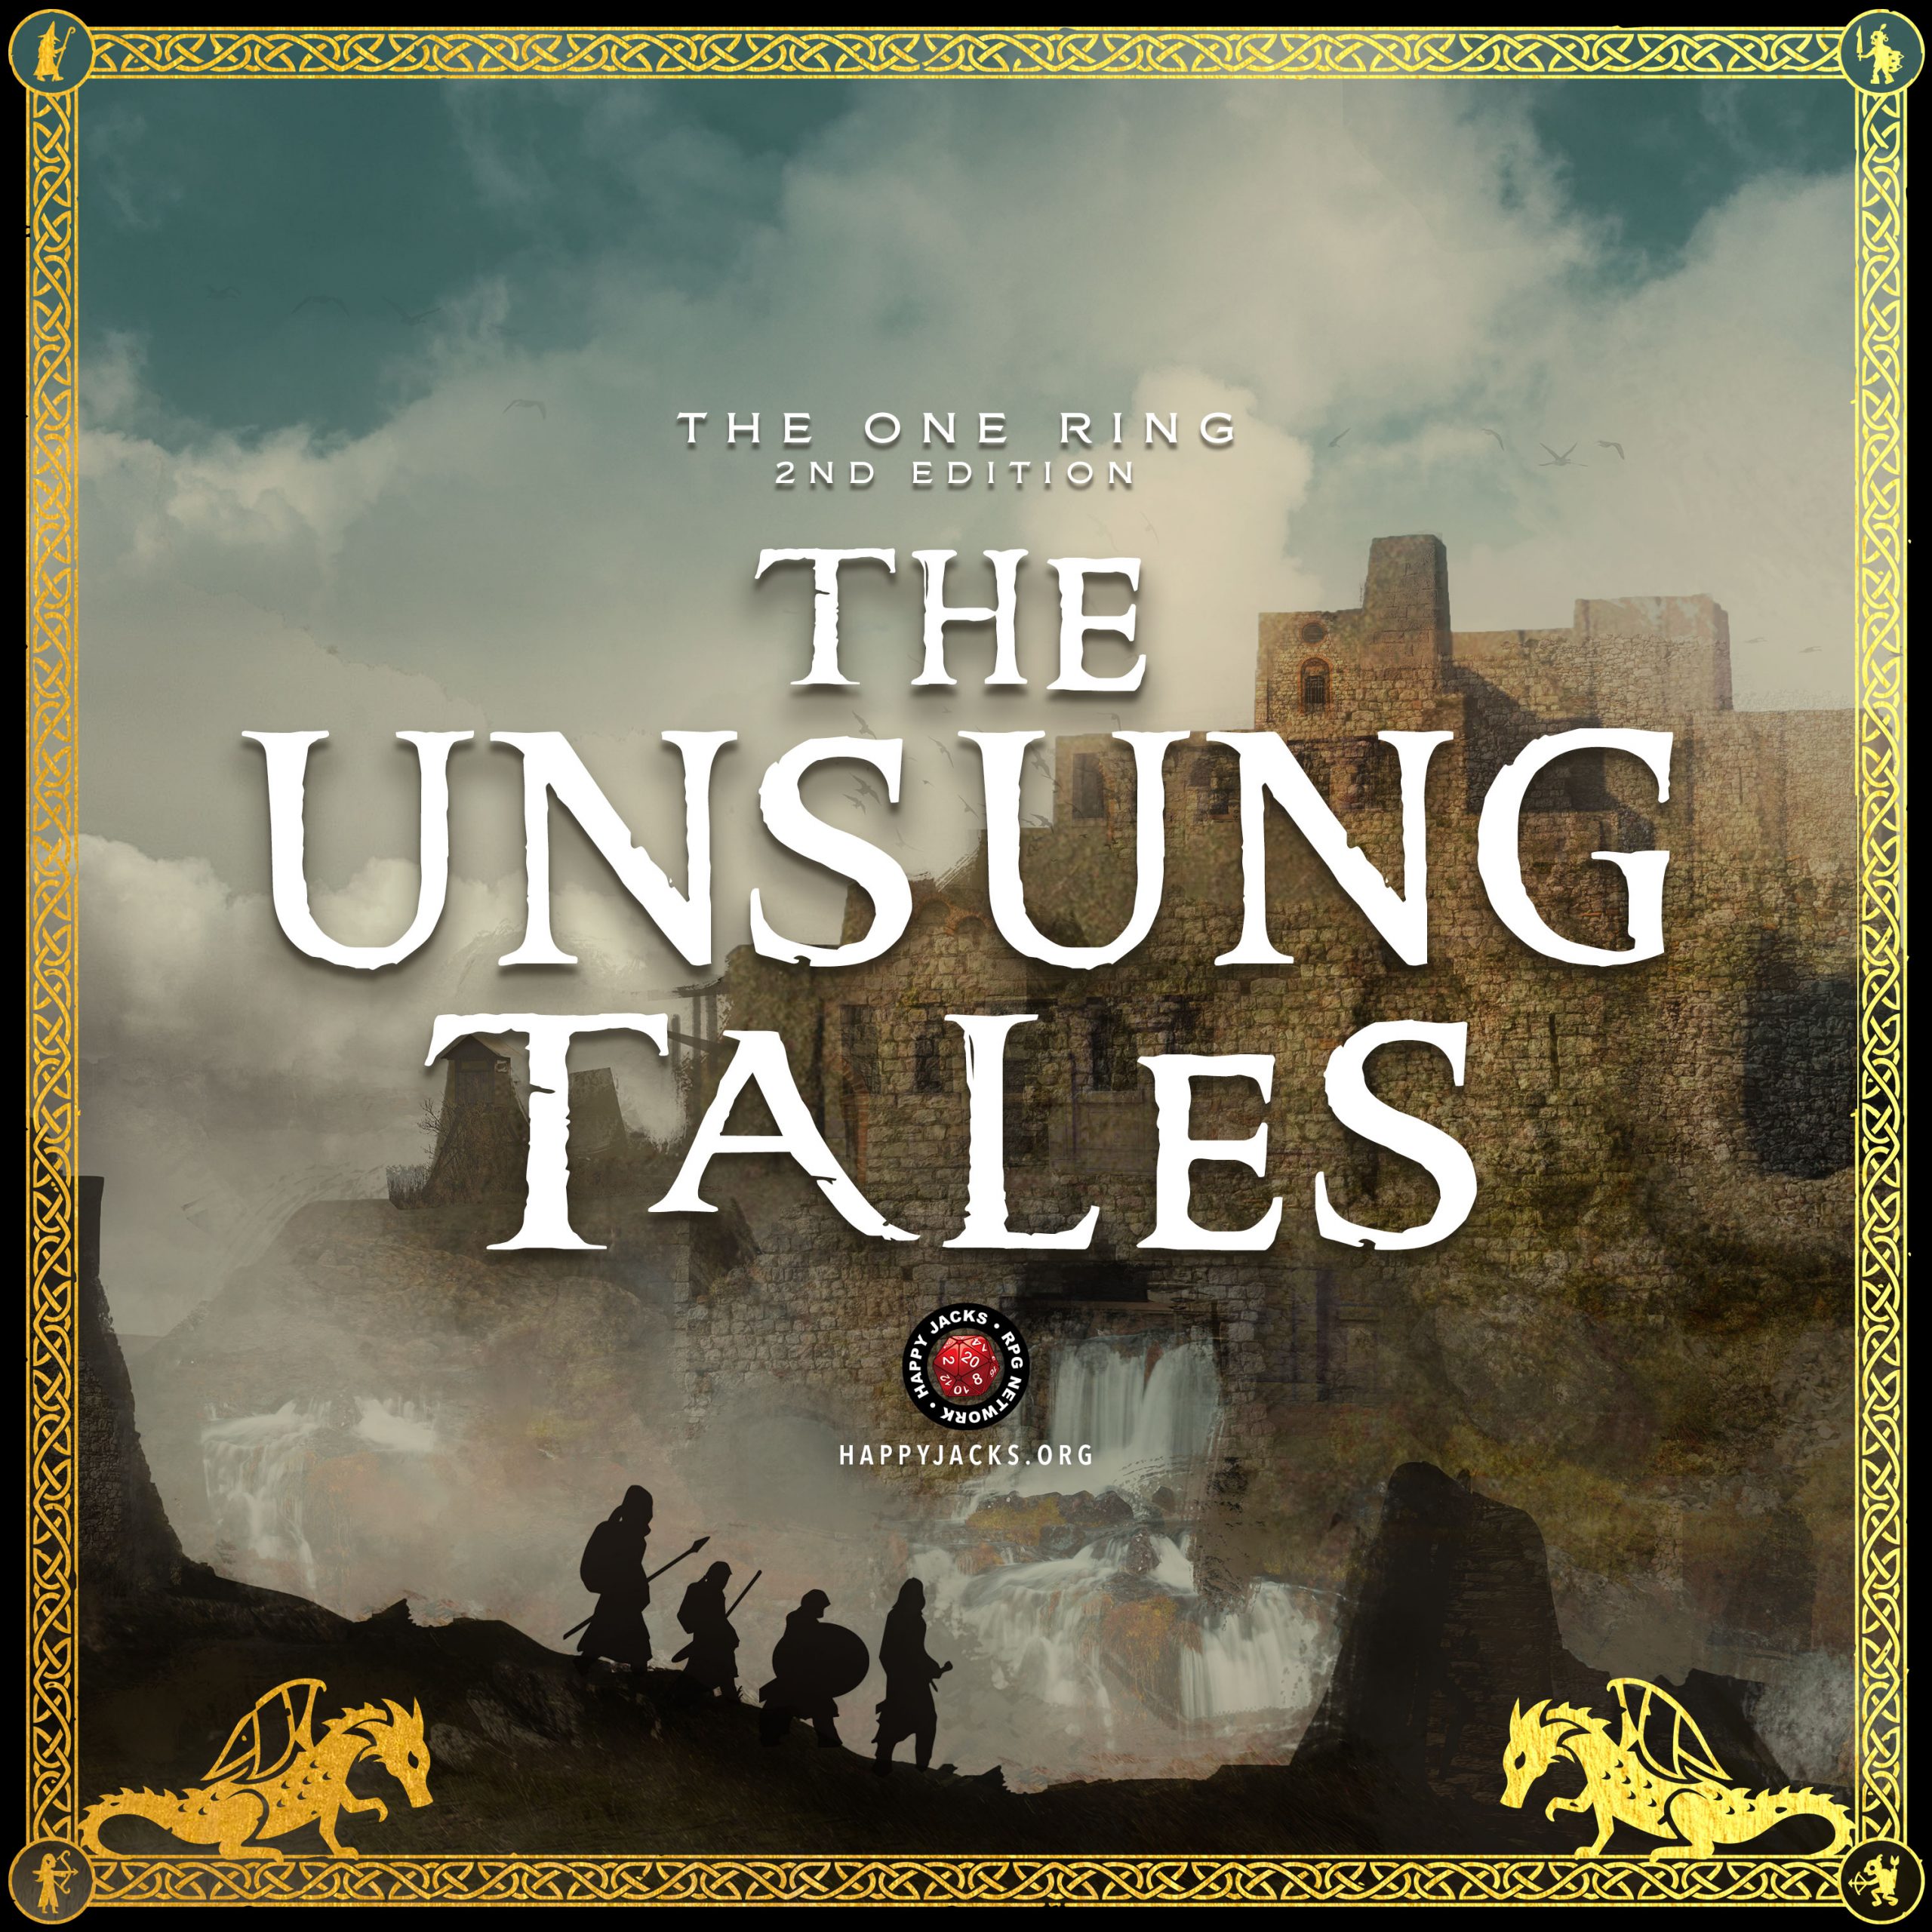 UNSUNG15 Glorfindel’s Maps | The Unsung Tales | The One Ring 2e